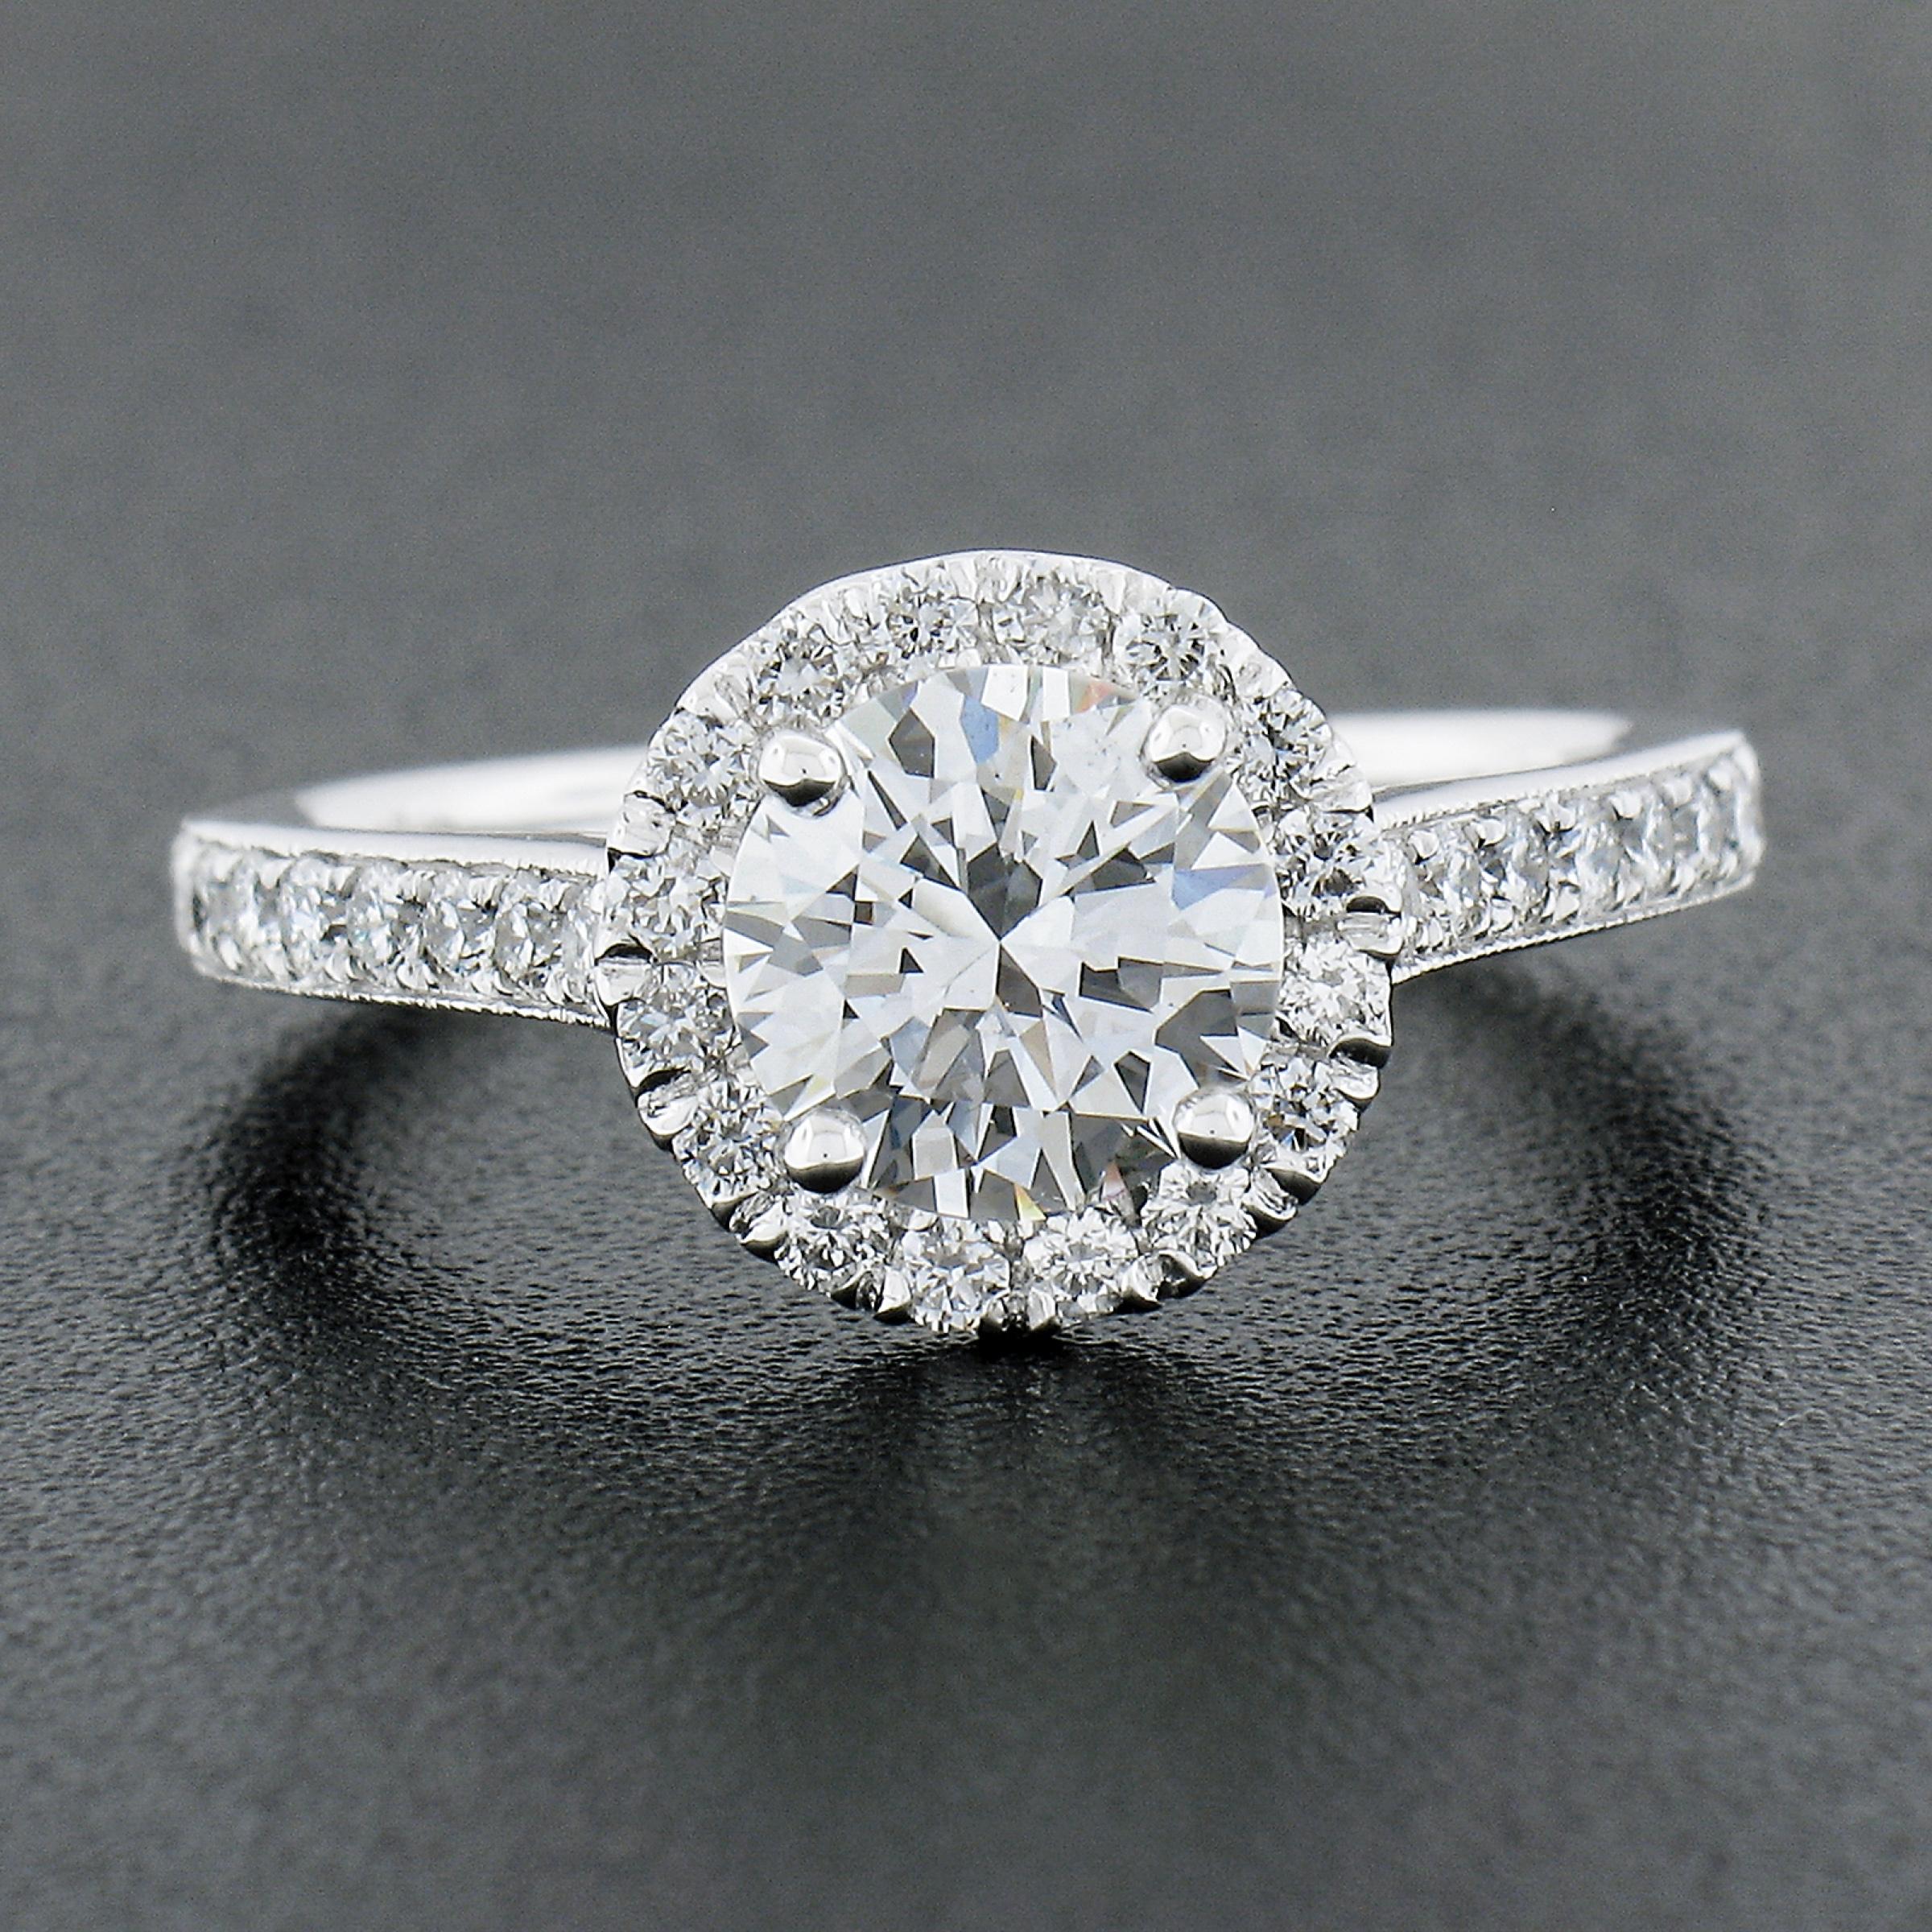 Classic setting with a halo and diamonds down the side that perfectly compliment the high quality center diamond without interrupting the focus on the center diamond! Comes complete with the GIA certification and is ready to make that special